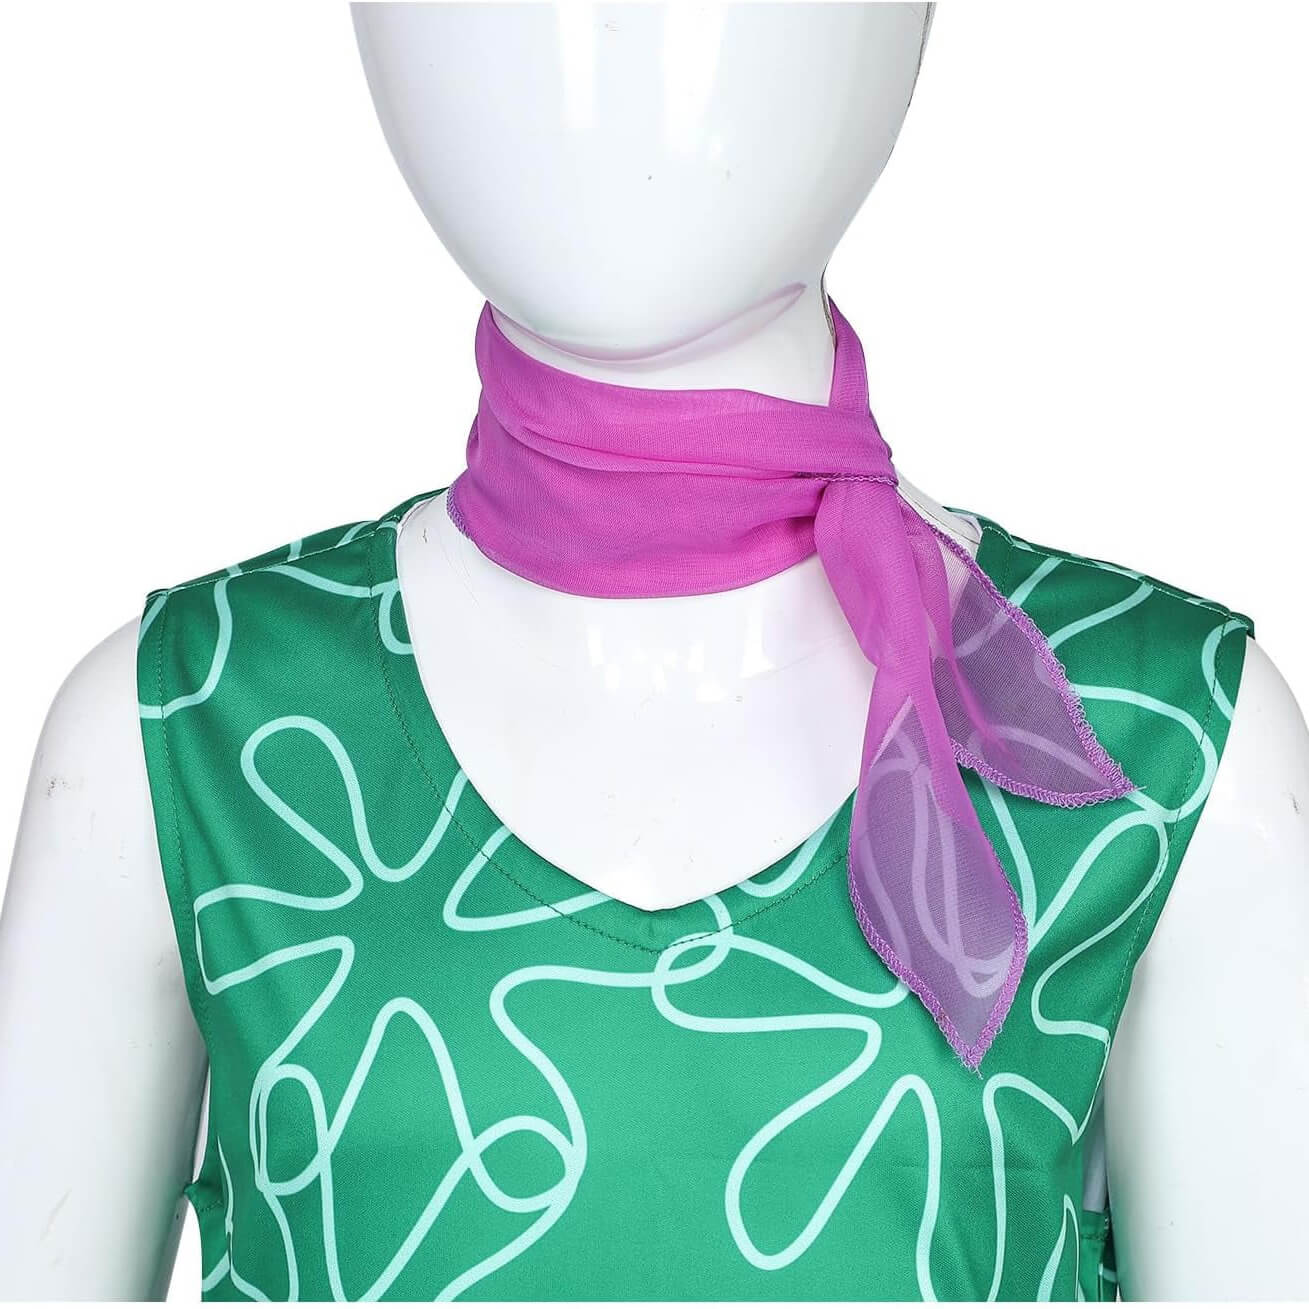 Inside Out Disgust Costume Green Sleeveless Dress with Belt and Scarf Kids Disgust Cosplay Outfit